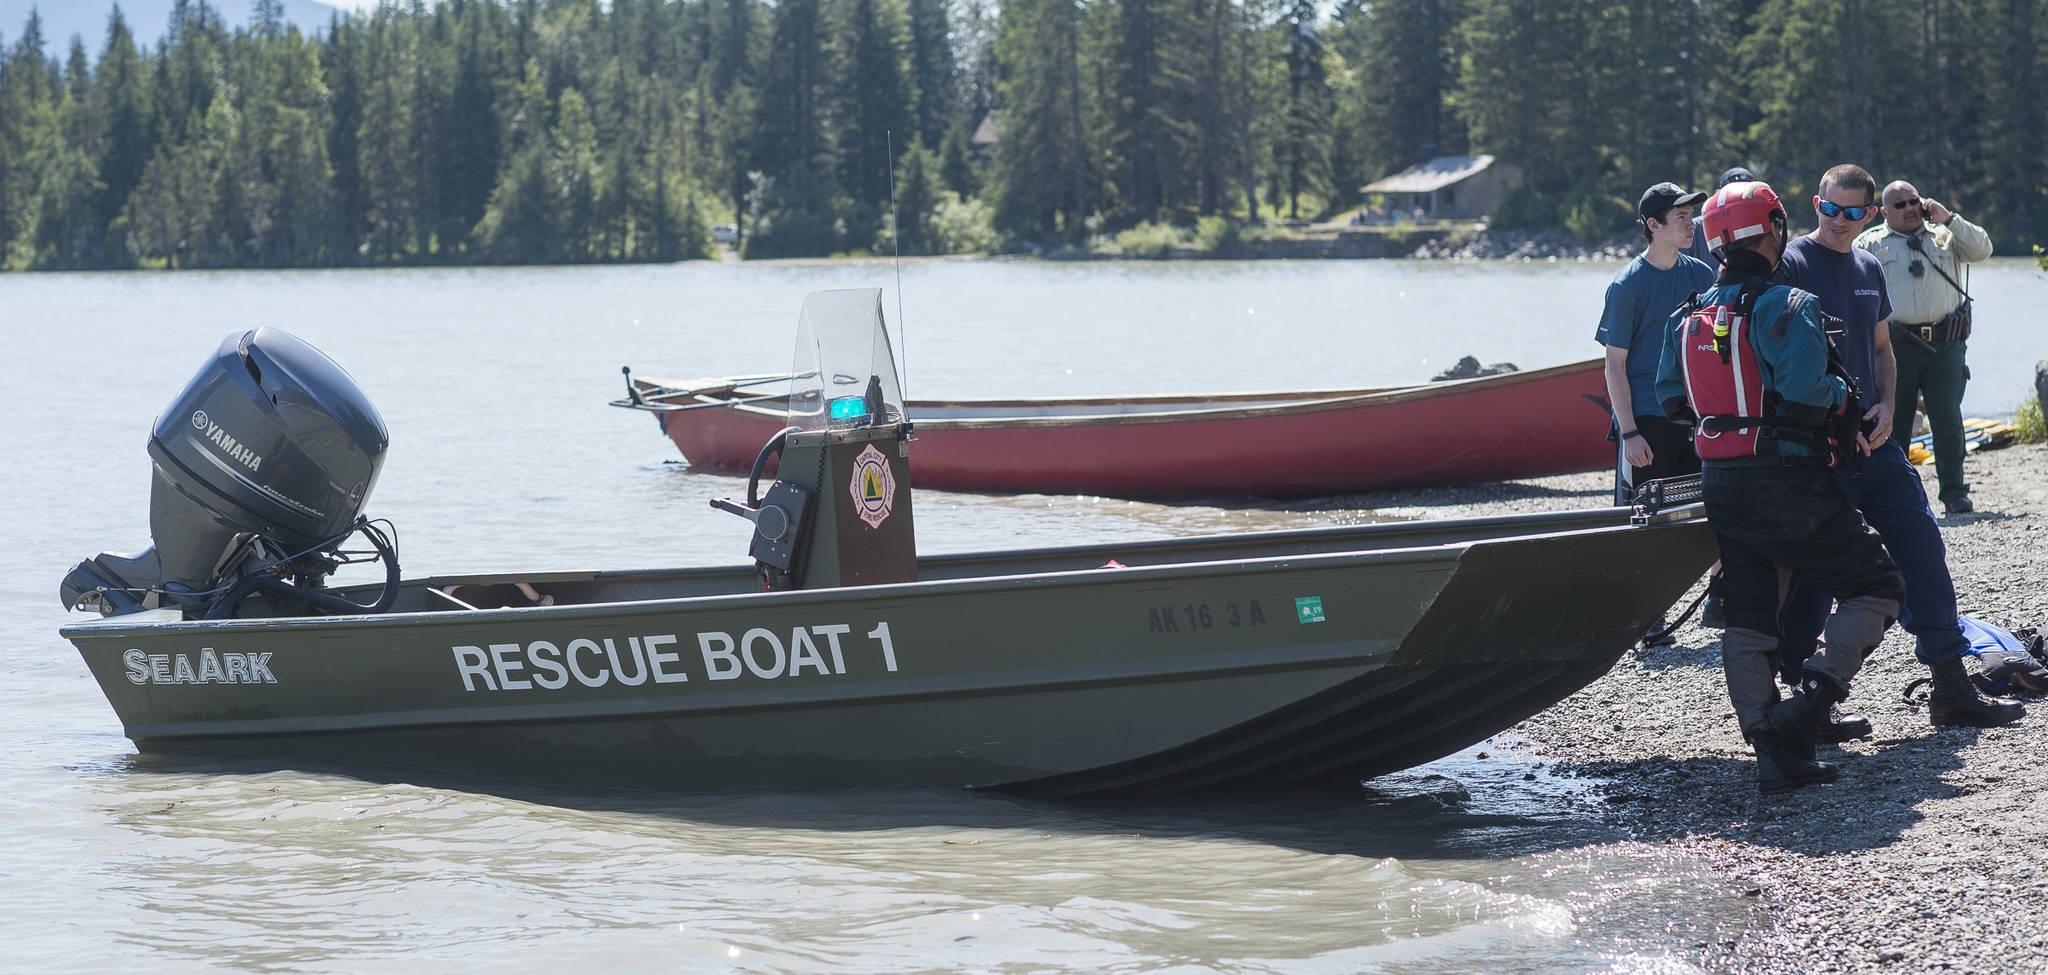 Capital City Fire/Rescue personnel respond to a overturned canoe at Mendenhall Lake on Friday, July 20, 2018. (Michael Penn | Juneau Empire)